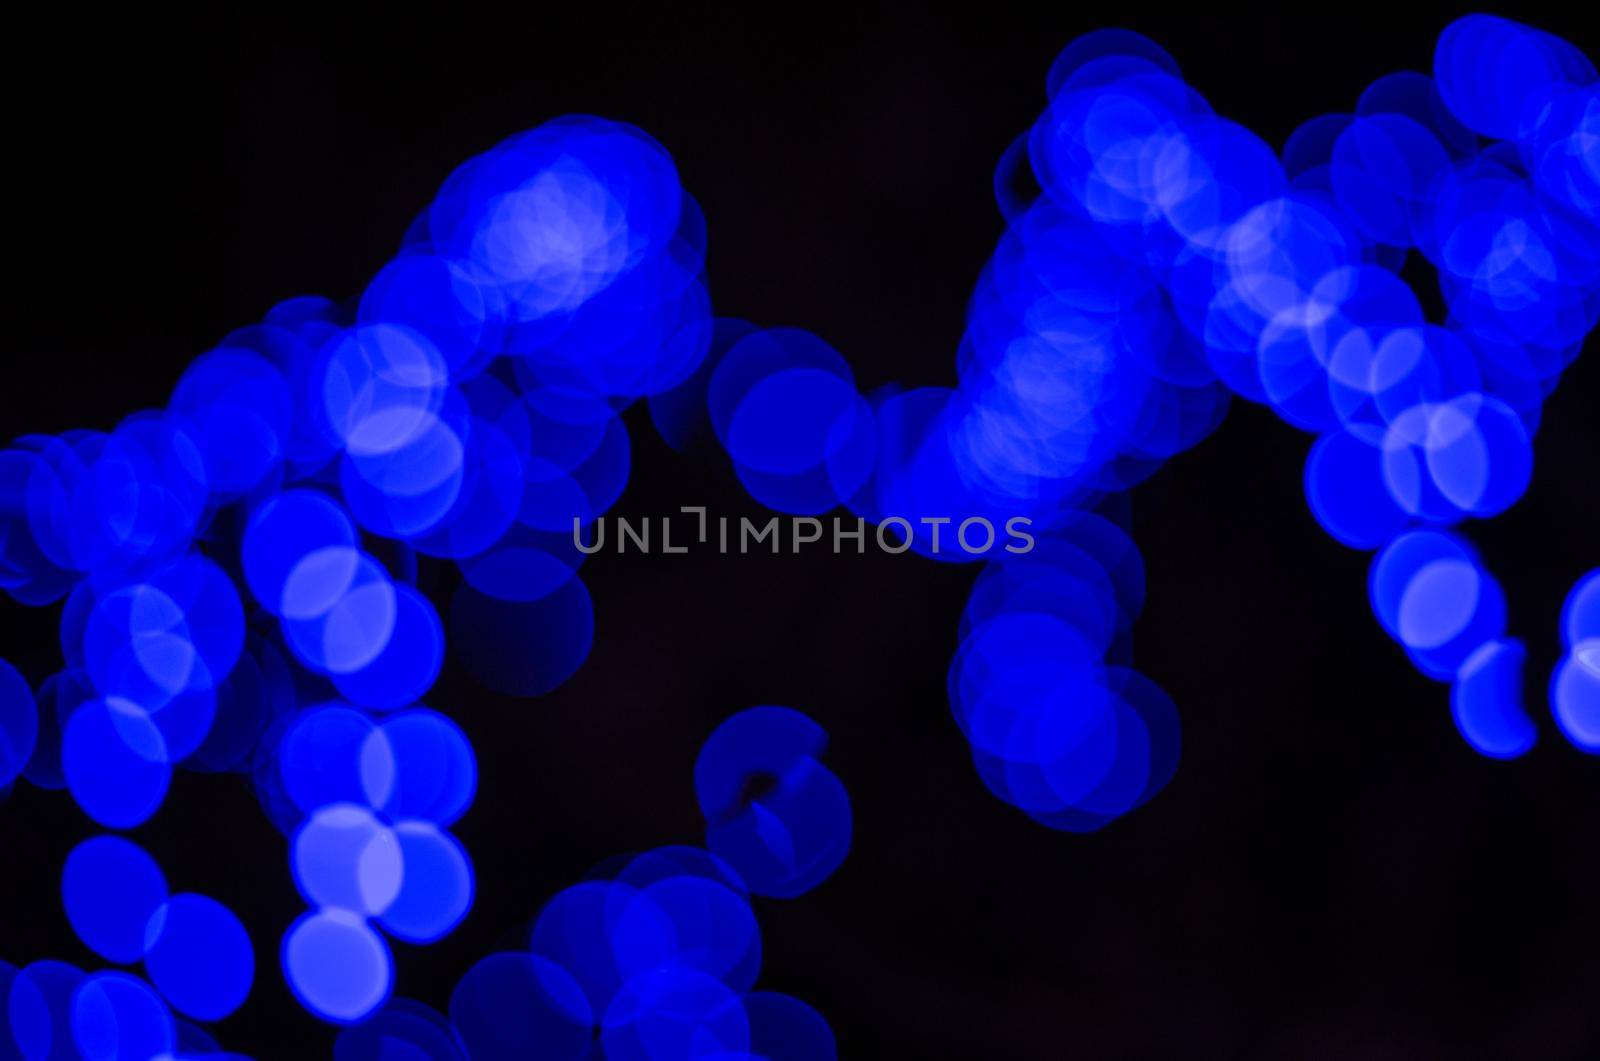 Christmas illumination from a blurry image of blue garlands.